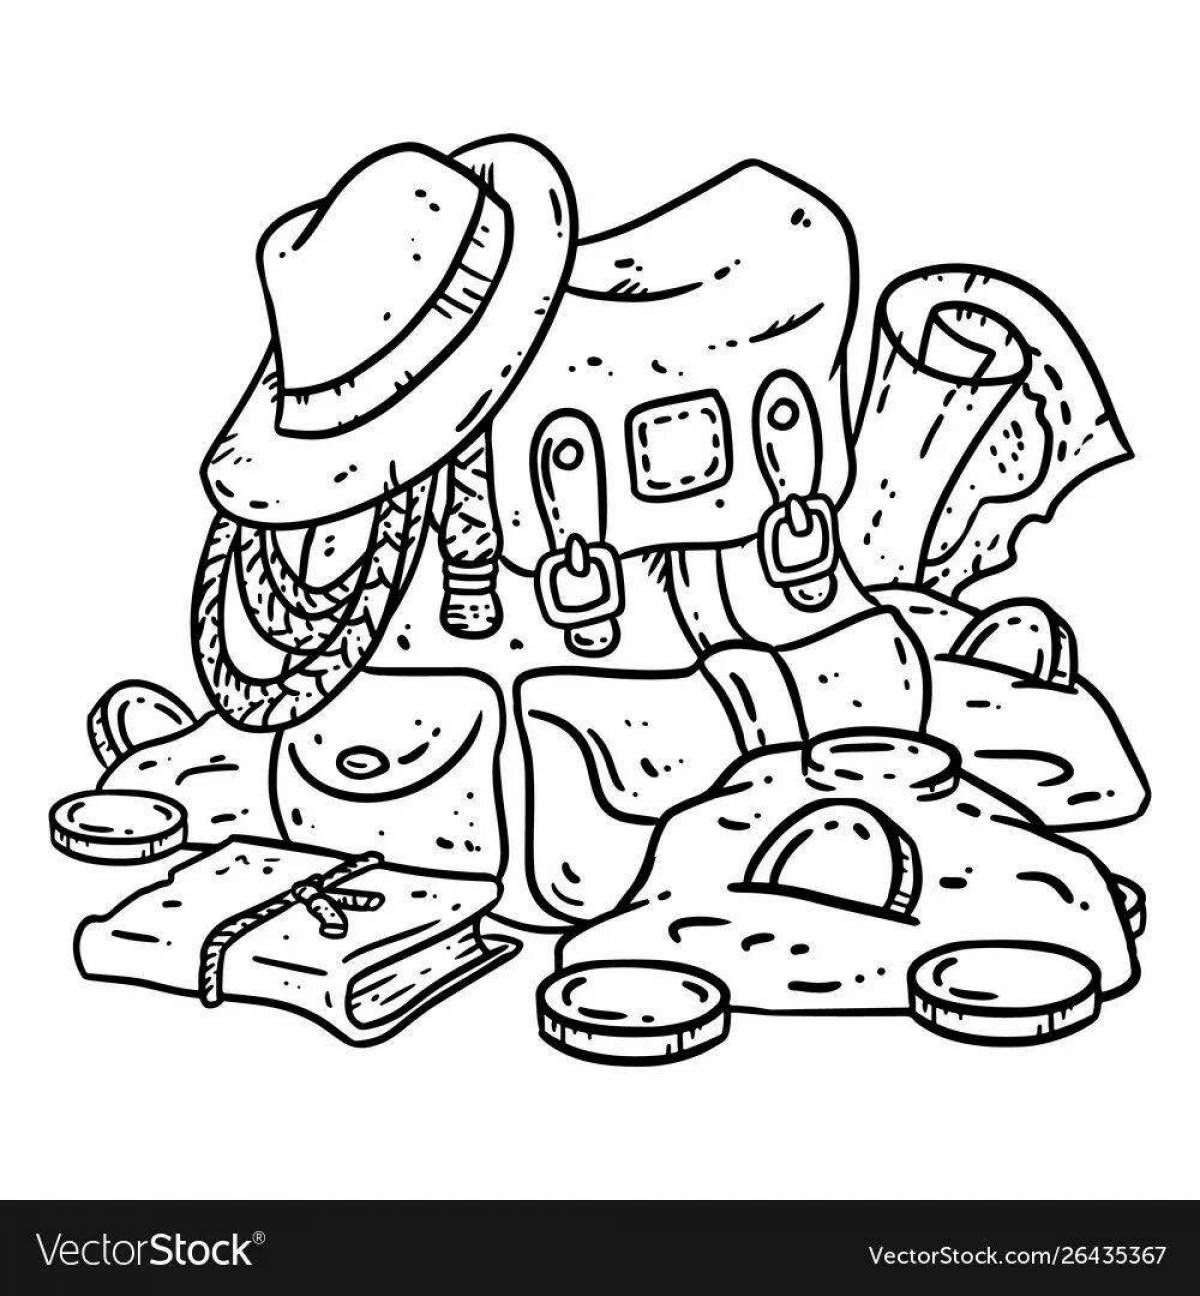 Curious archaeologist coloring page